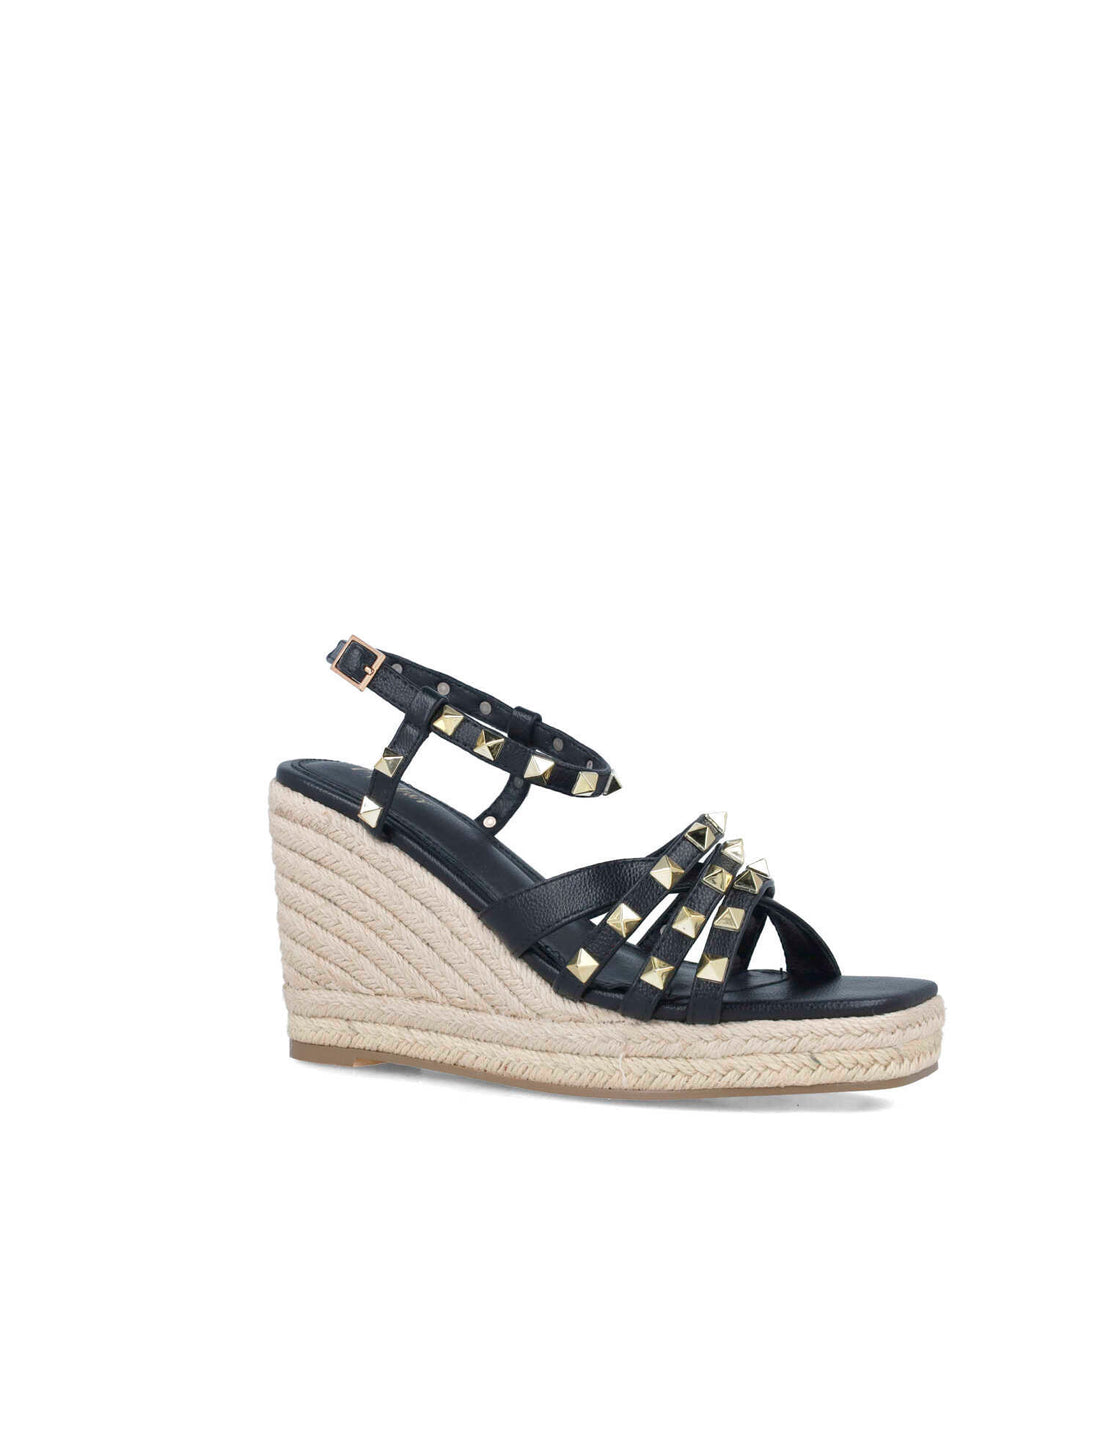 Studded Wedges With Braided Platform_24909_01_01